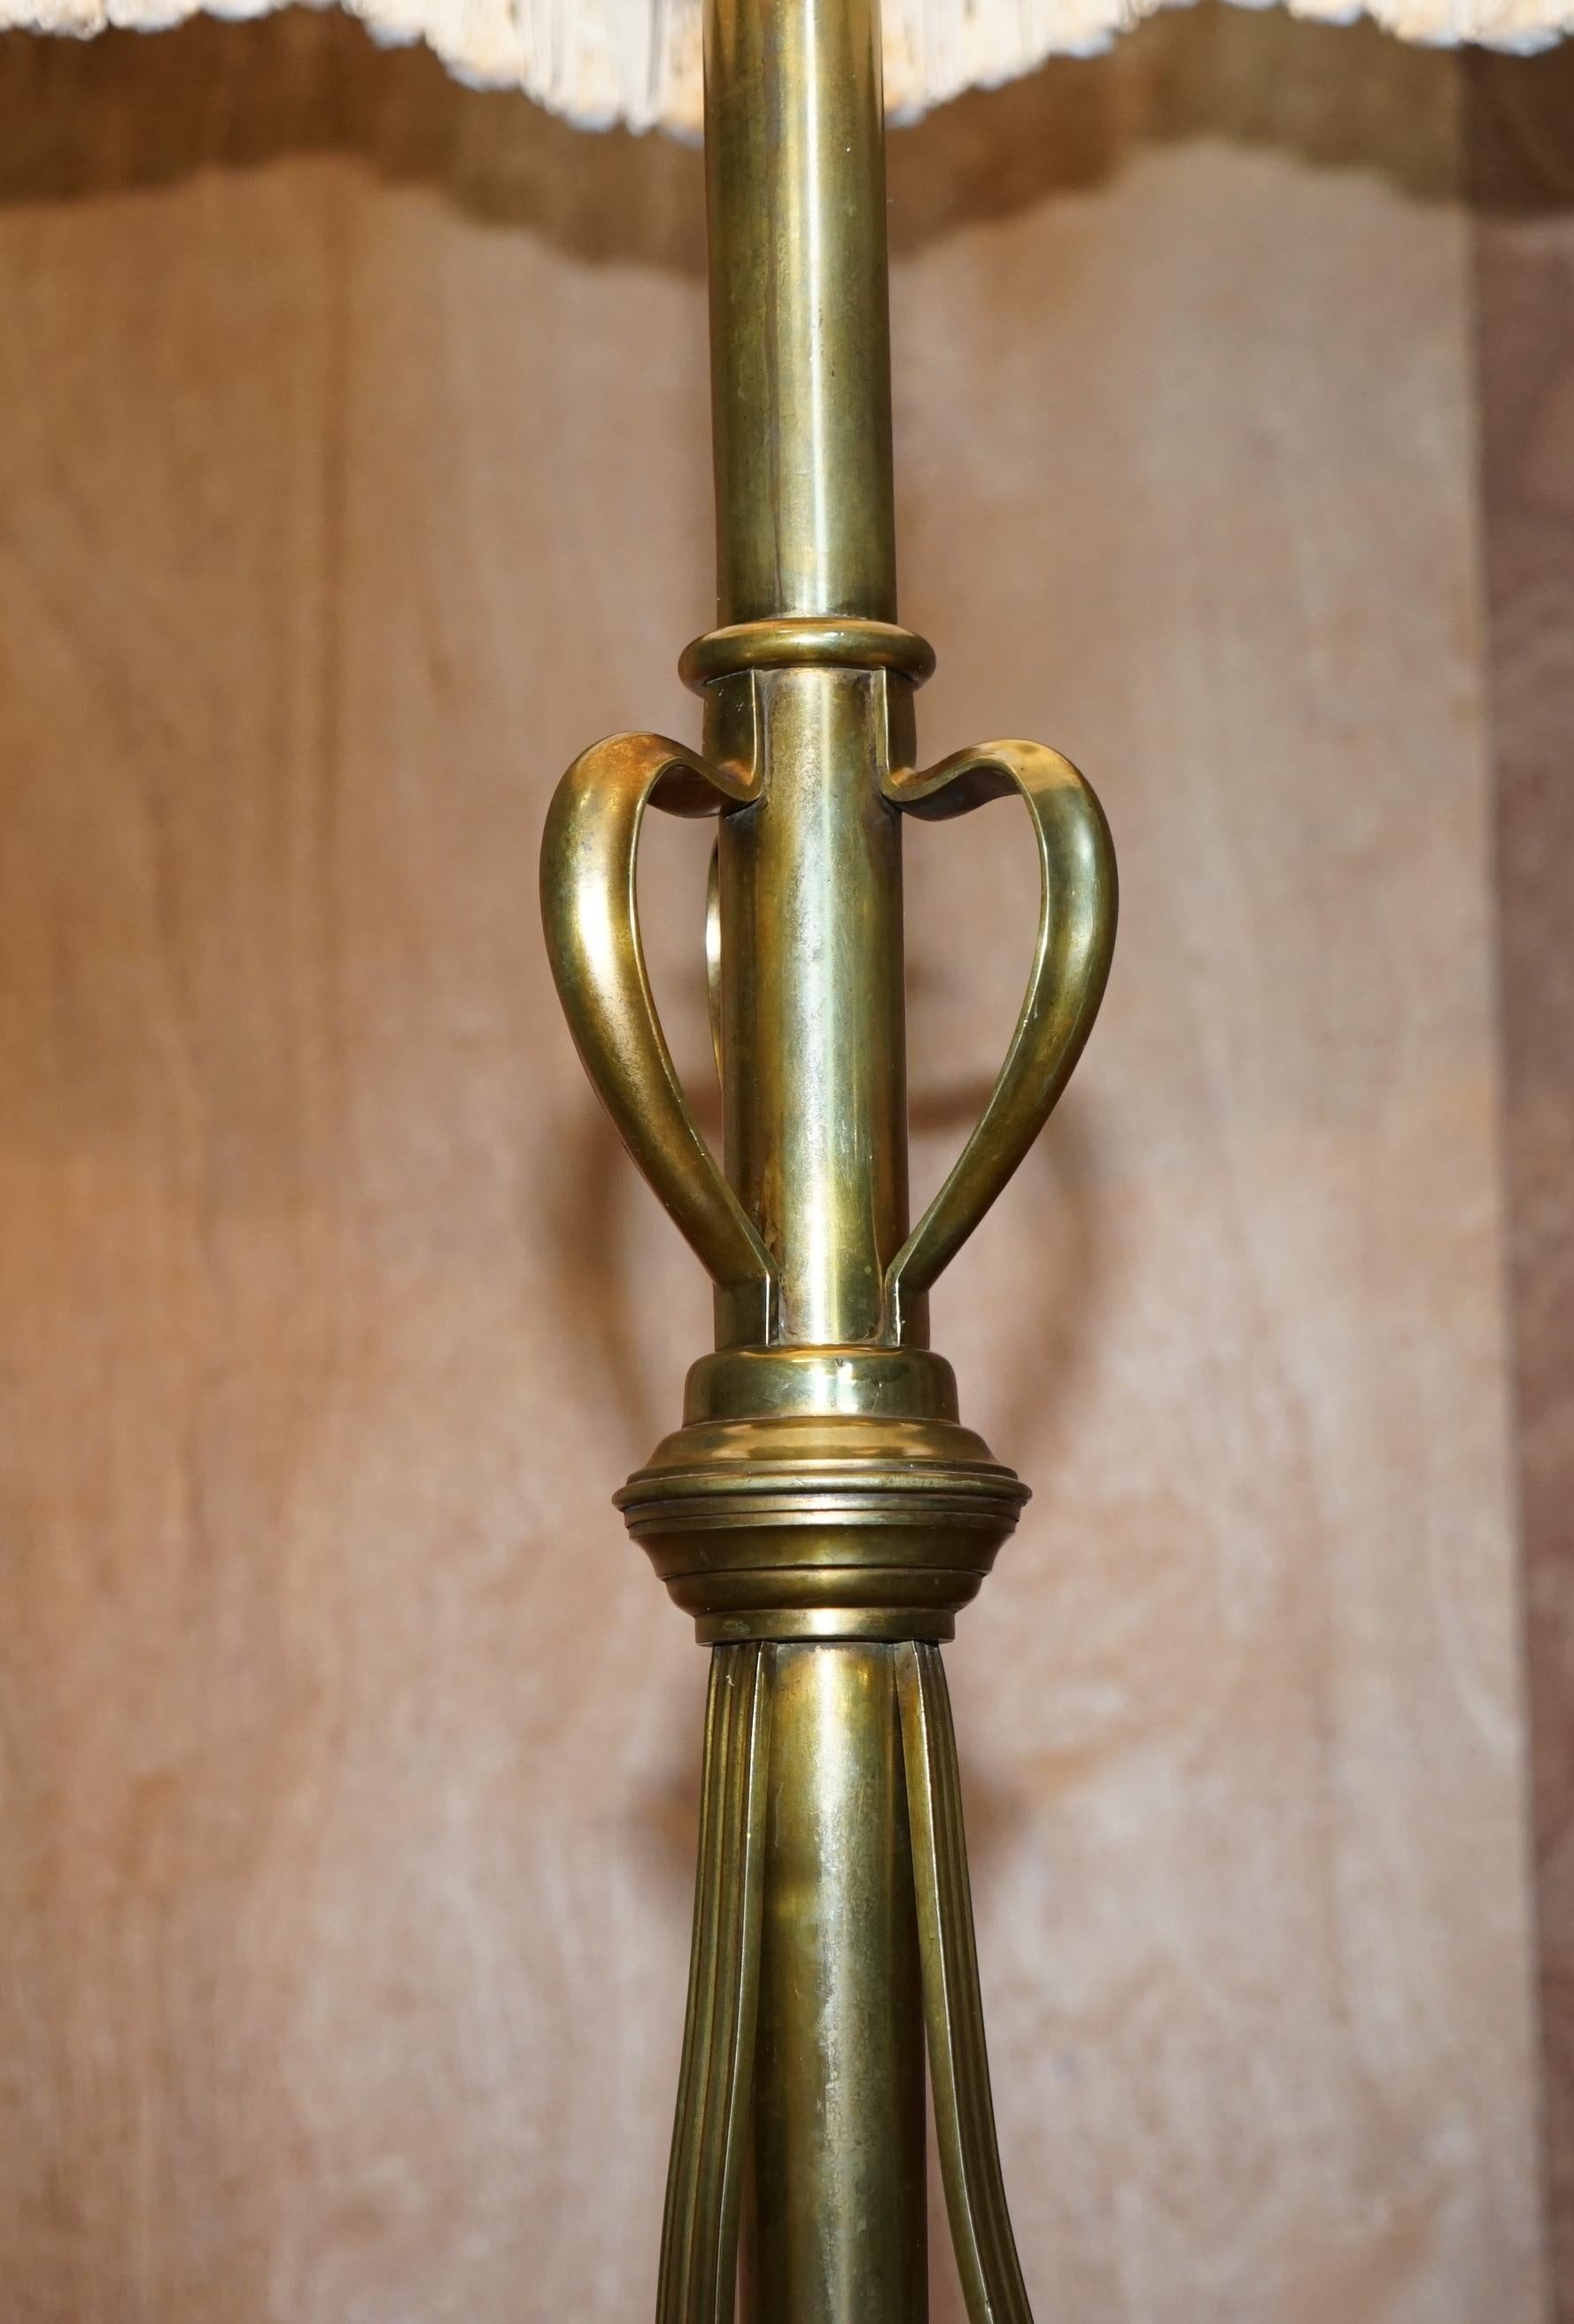 Early 20th Century Antique Art Nouveau Floor Standing Lamp Height Adjustable Brass Sculptured Frame For Sale